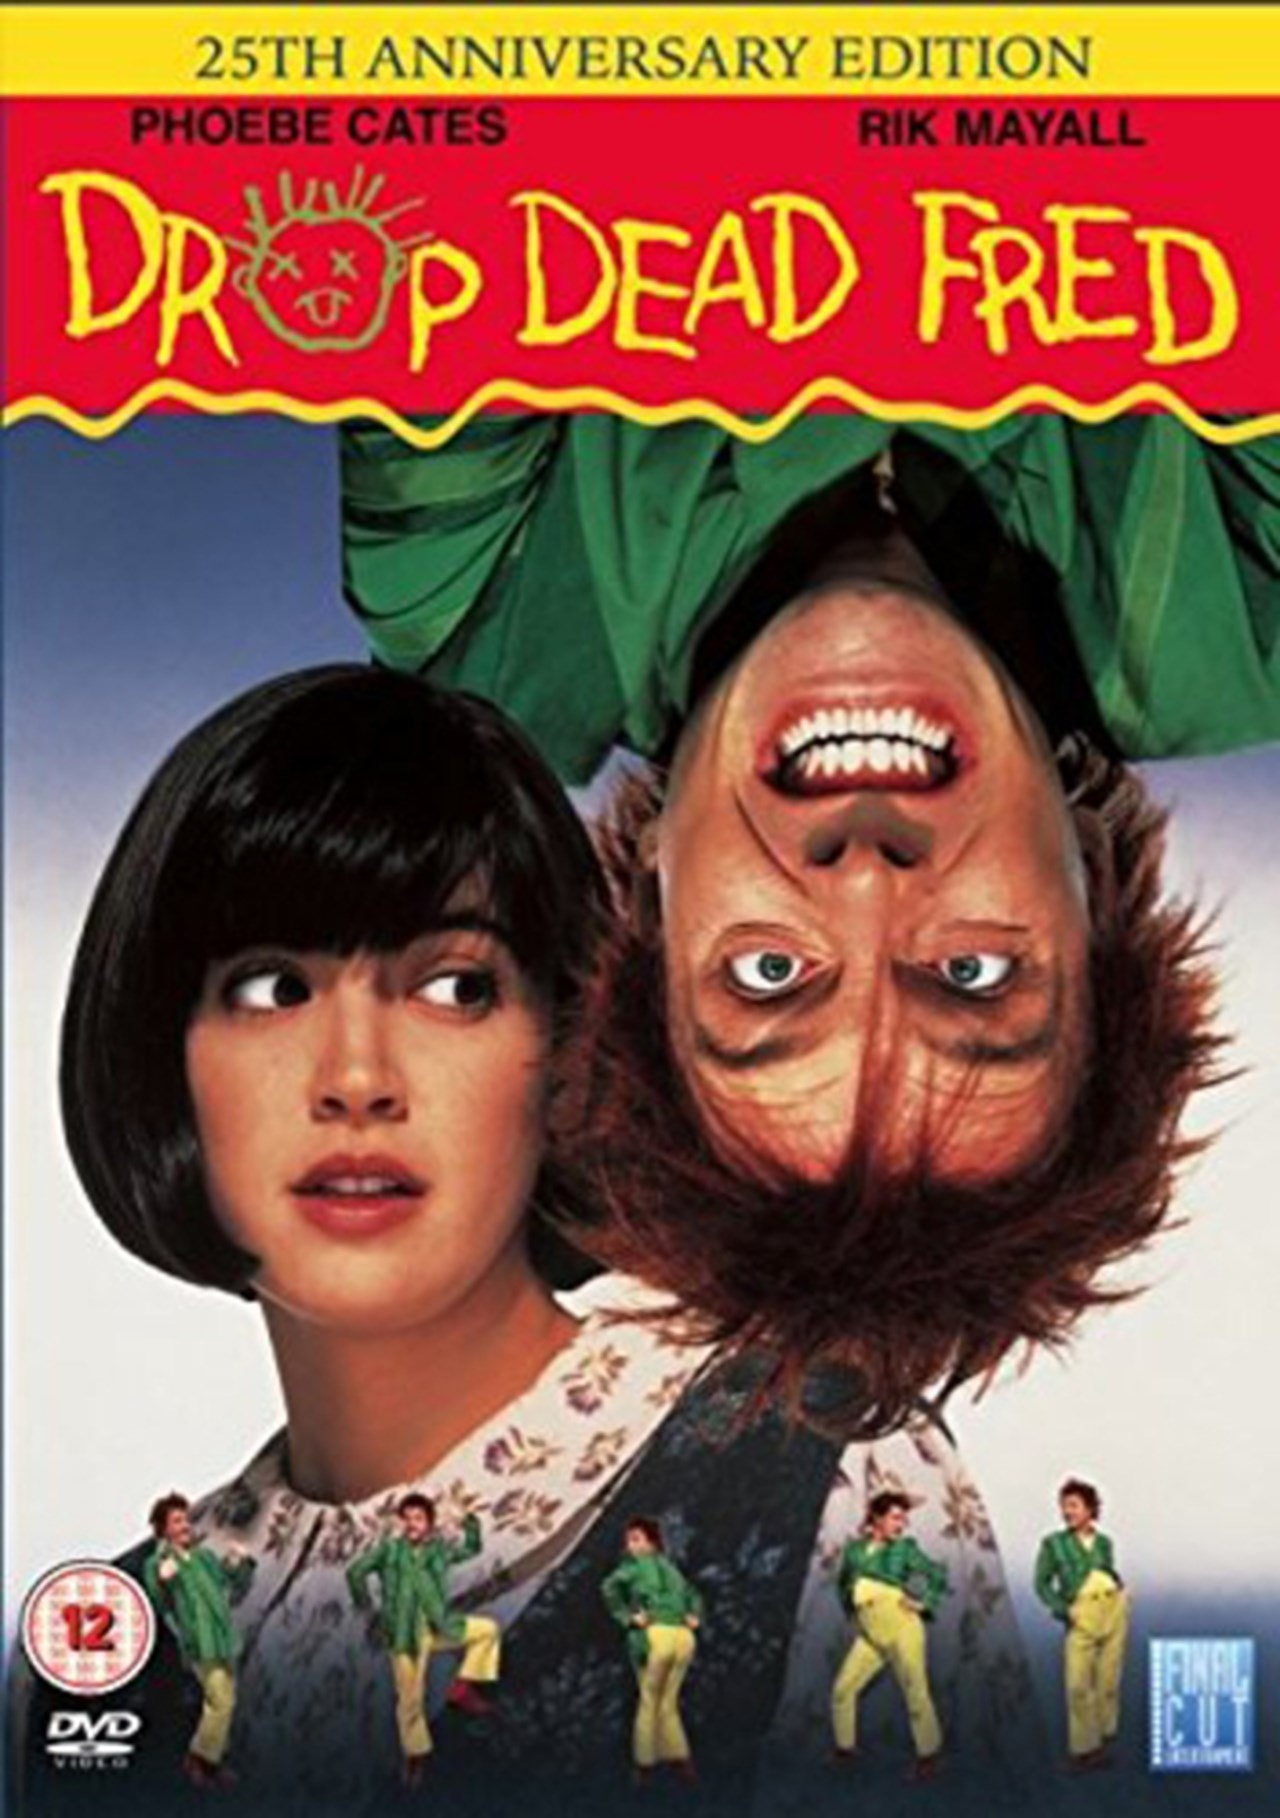 Drop Dead Fred | DVD | Free shipping over £20 | HMV Store